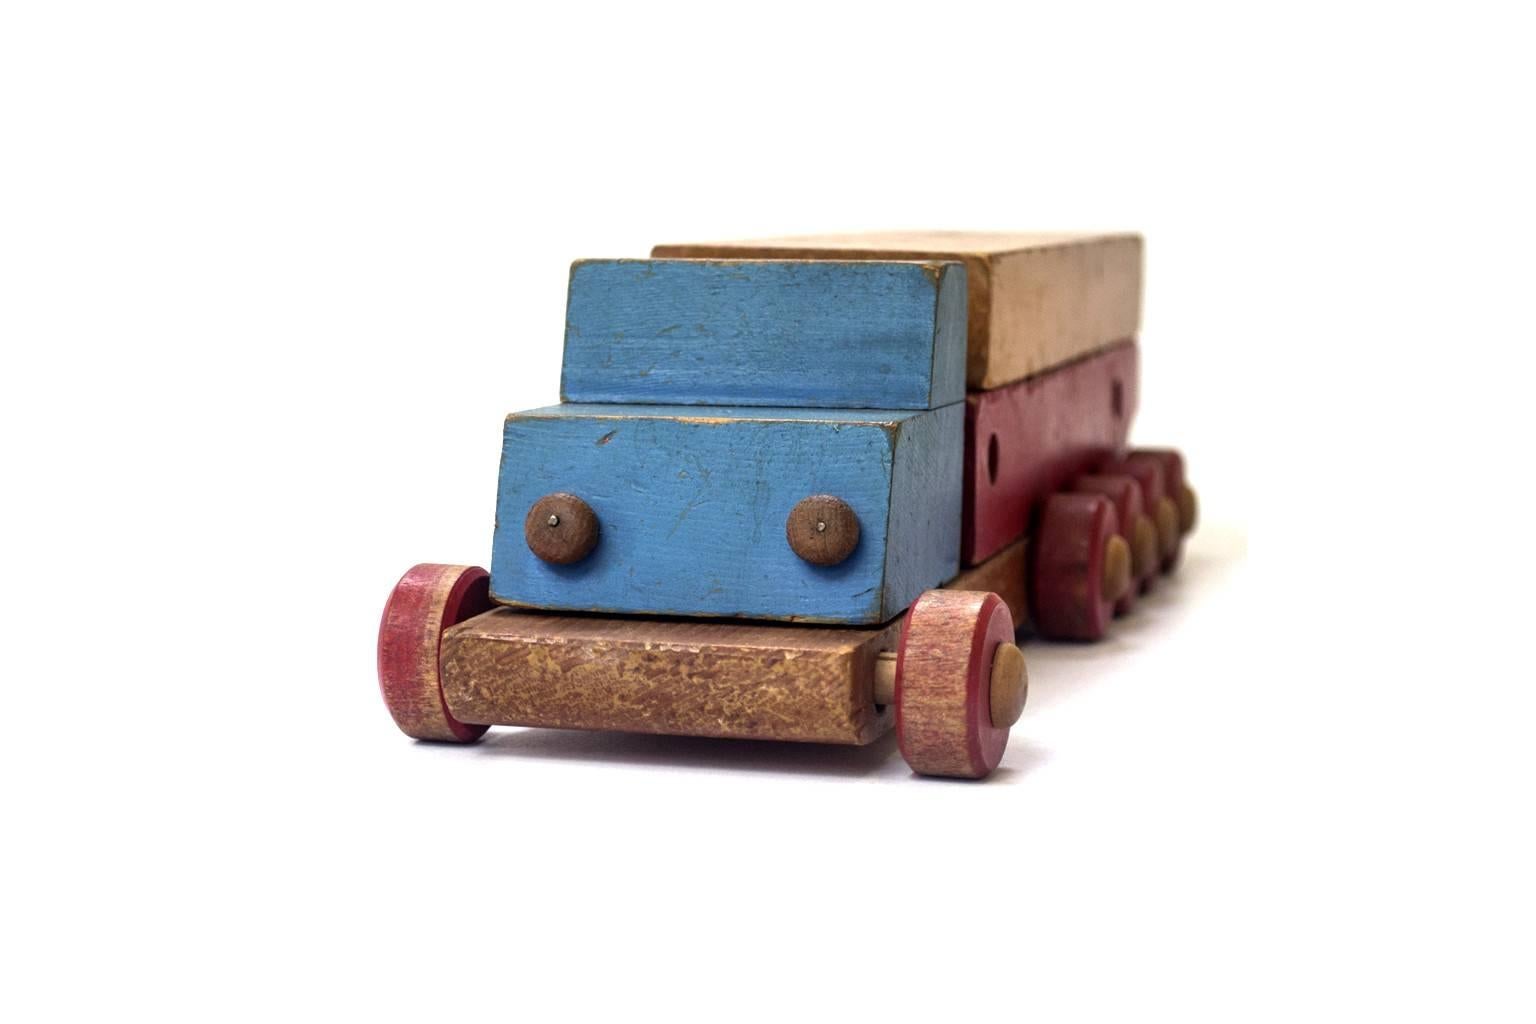 Folk Art Stack Truck in Hand Painted Wood, USA, Mid-20th Century

USA, Mid-20th Century
Hand Painted Wood
H 3.5 in, W 5 in, L 13.5 in